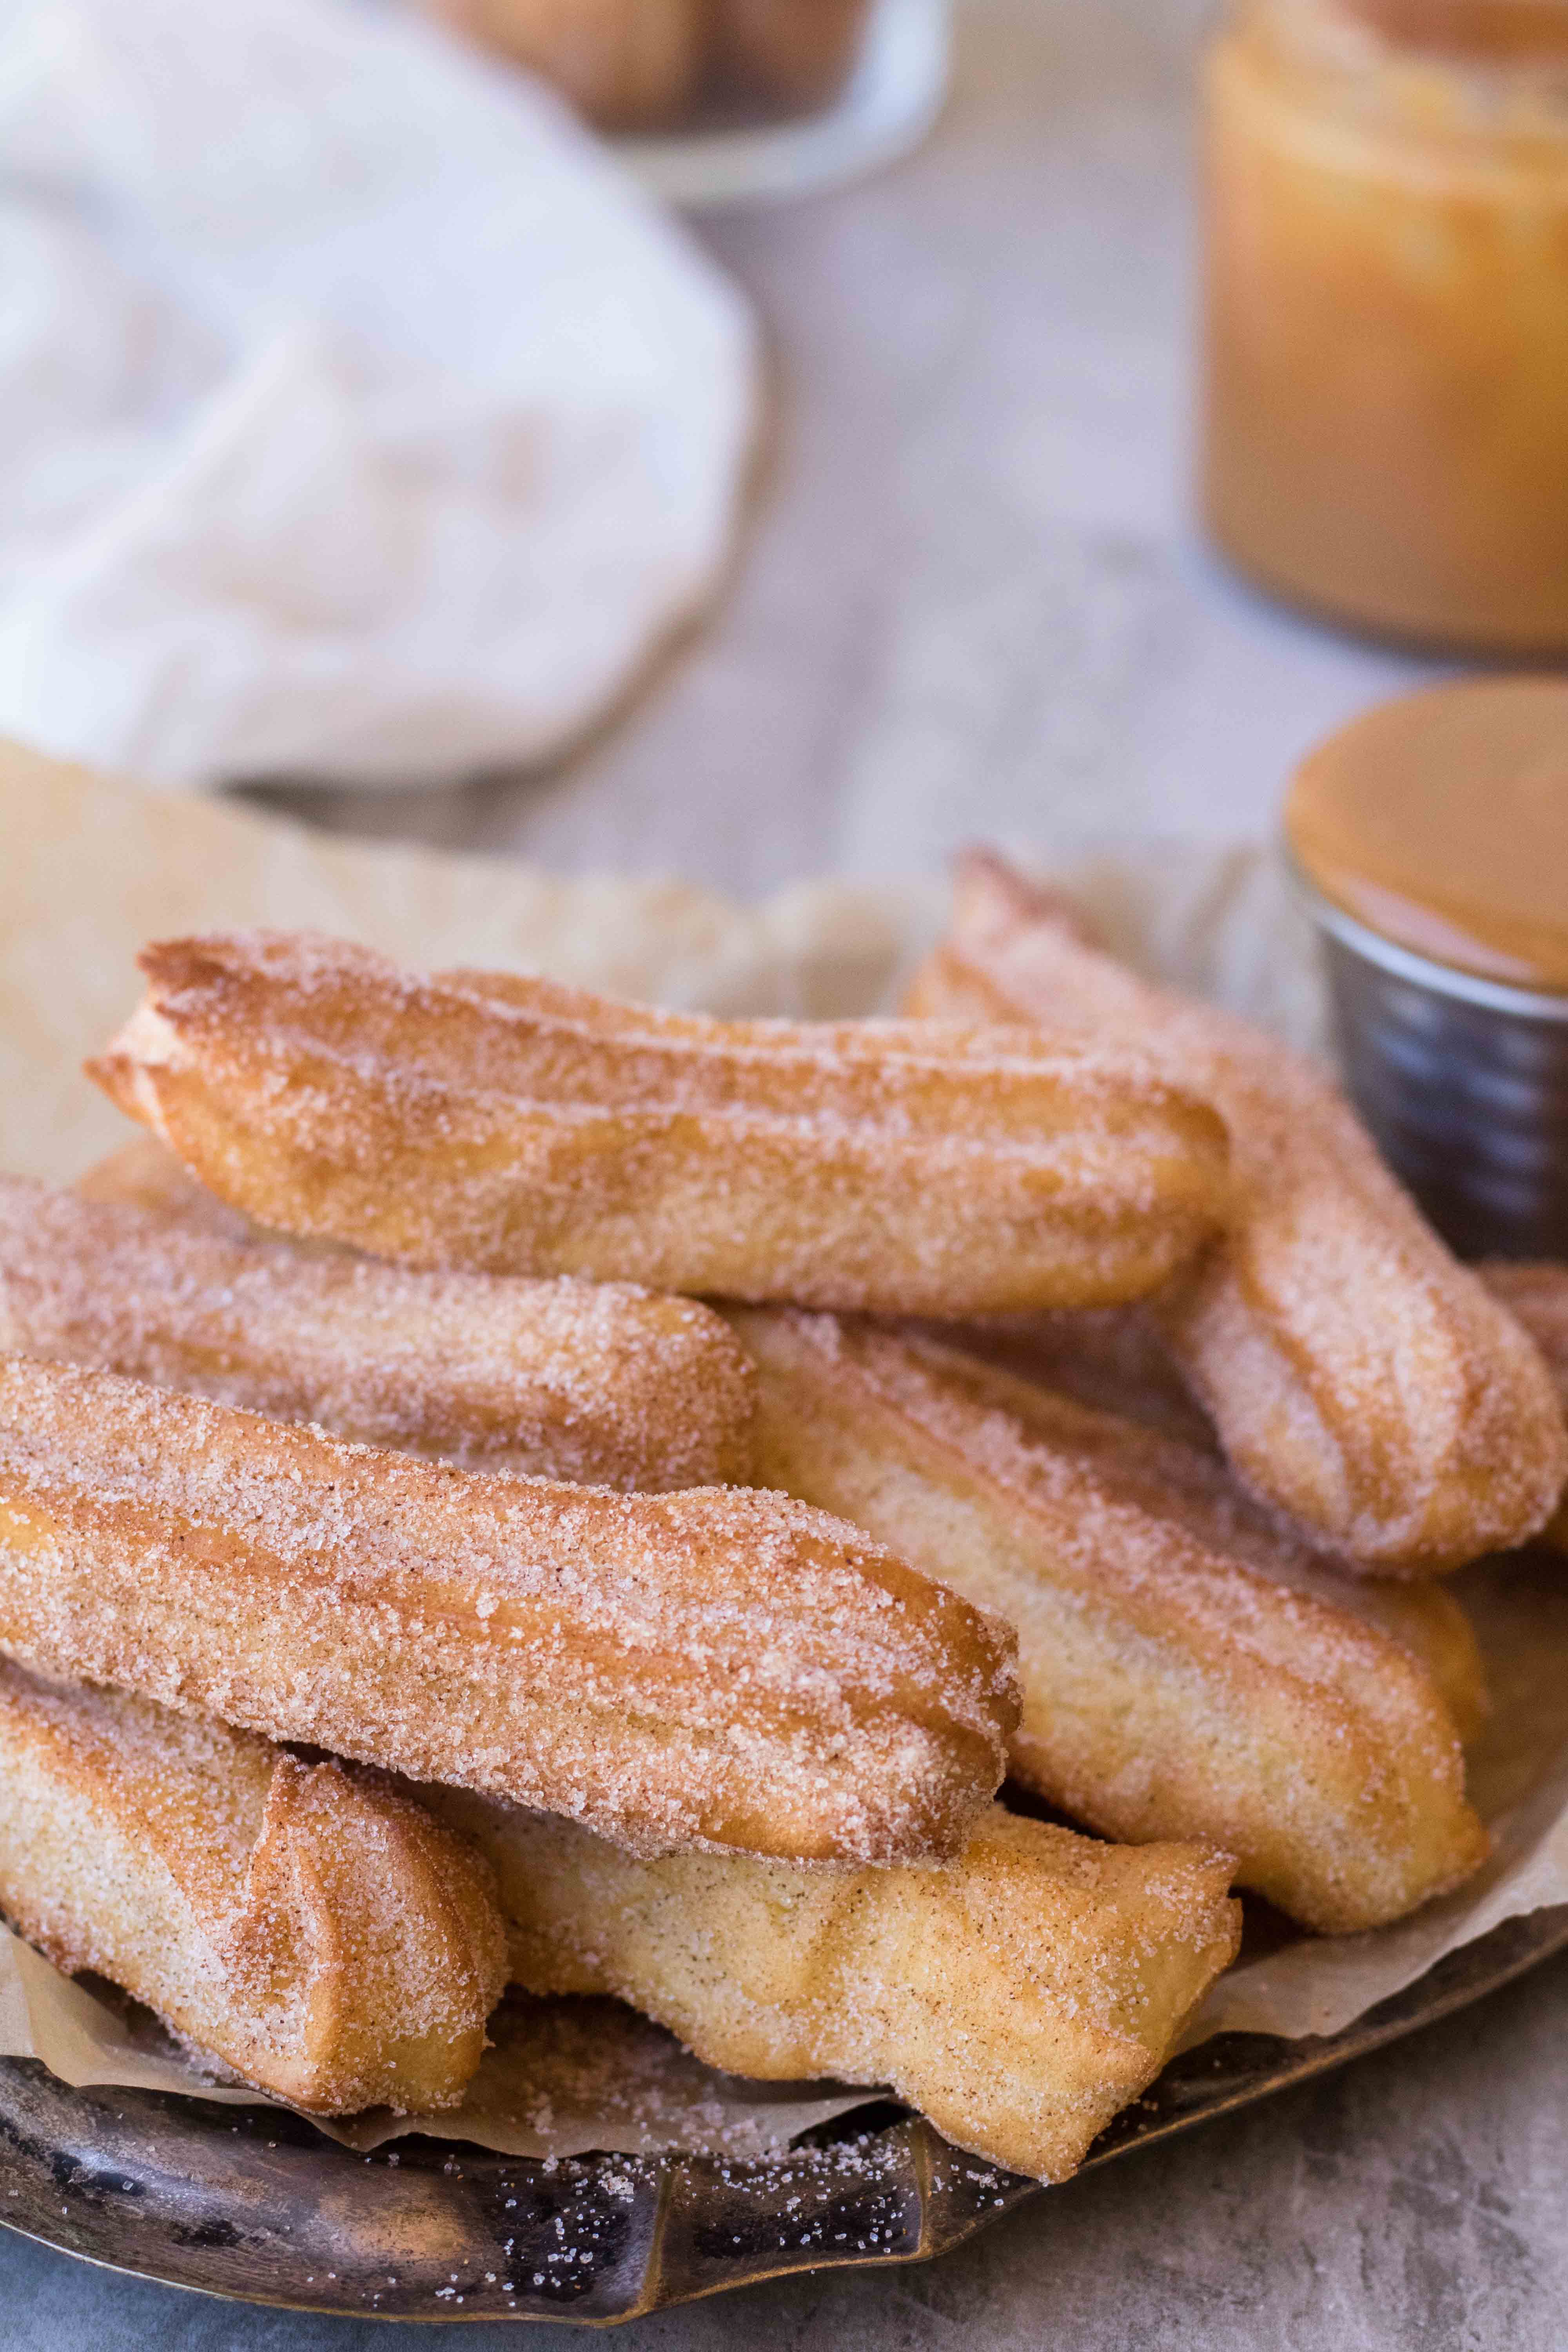 What is a churro?